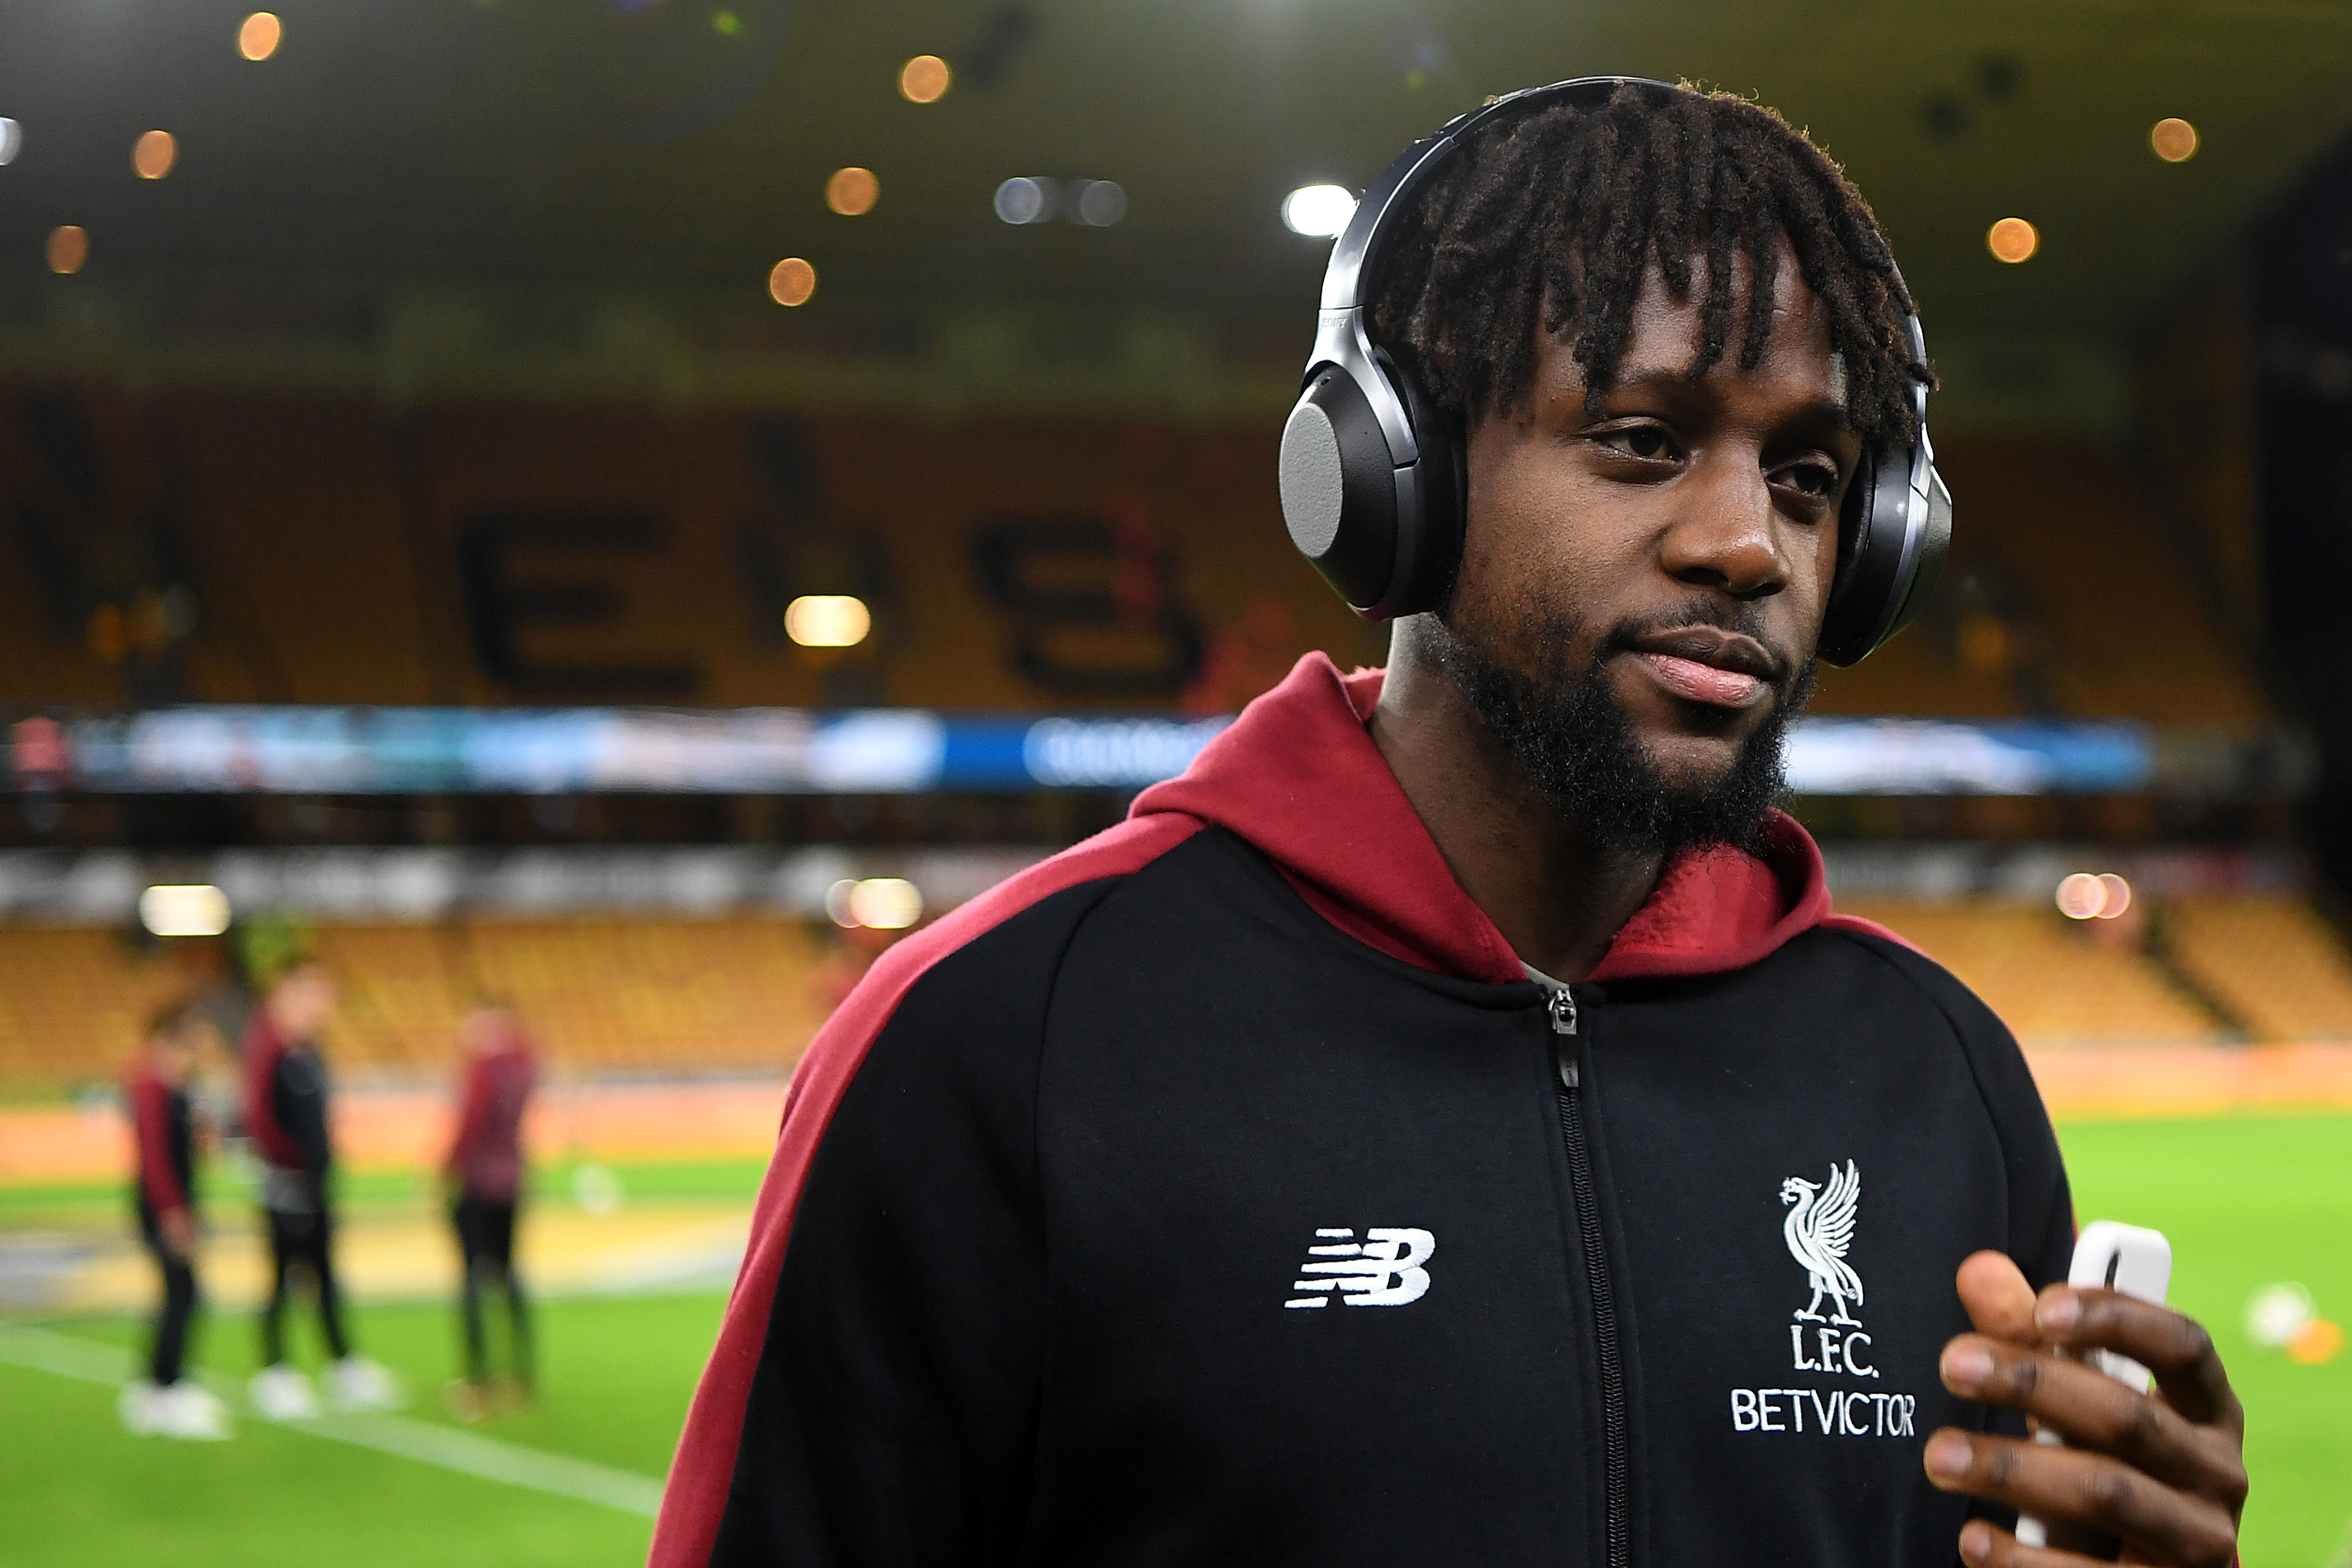 WOLVERHAMPTON, ENGLAND - JANUARY 07:  Divock Origi of Liverpool inspects the pitch prior to the Emirates FA Cup Third Round match between Wolverhampton Wanderers and Liverpool at Molineux on January 7, 2019 in Wolverhampton, United Kingdom.  (Photo by Michael Regan/Getty Images)